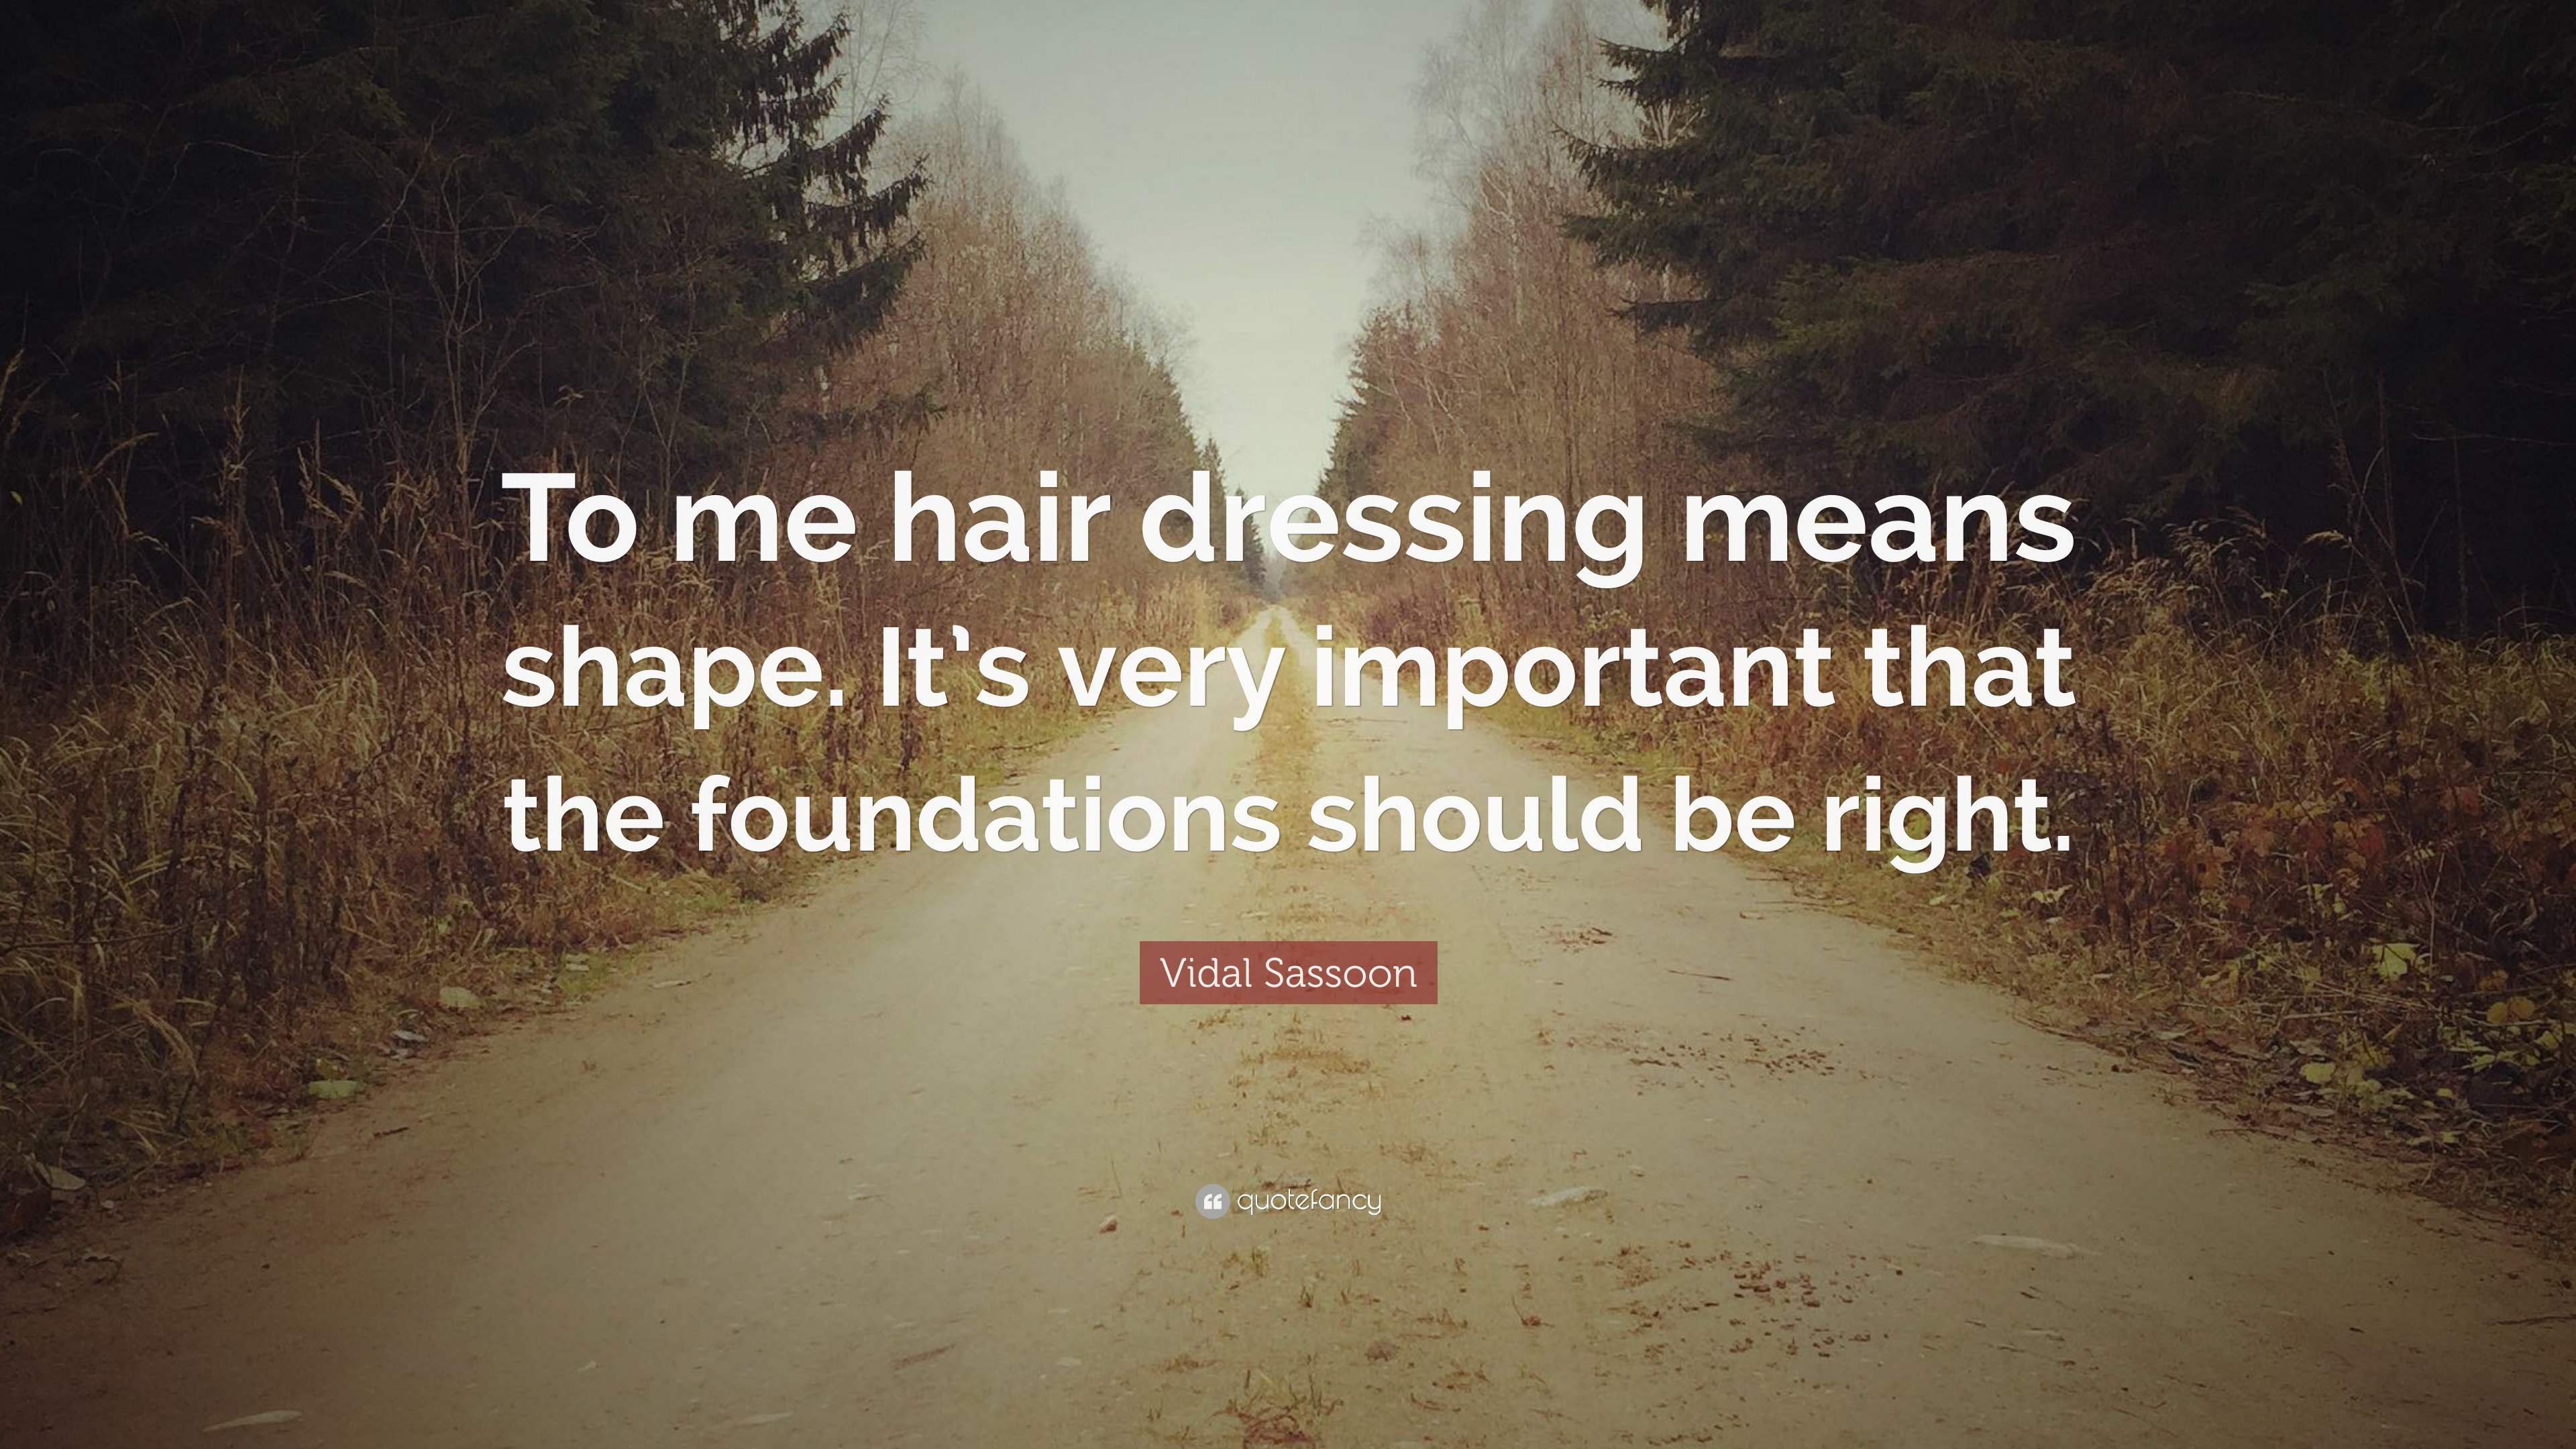 1083185 Vidal Sassoon Quote To me hair dressing means shape It s very